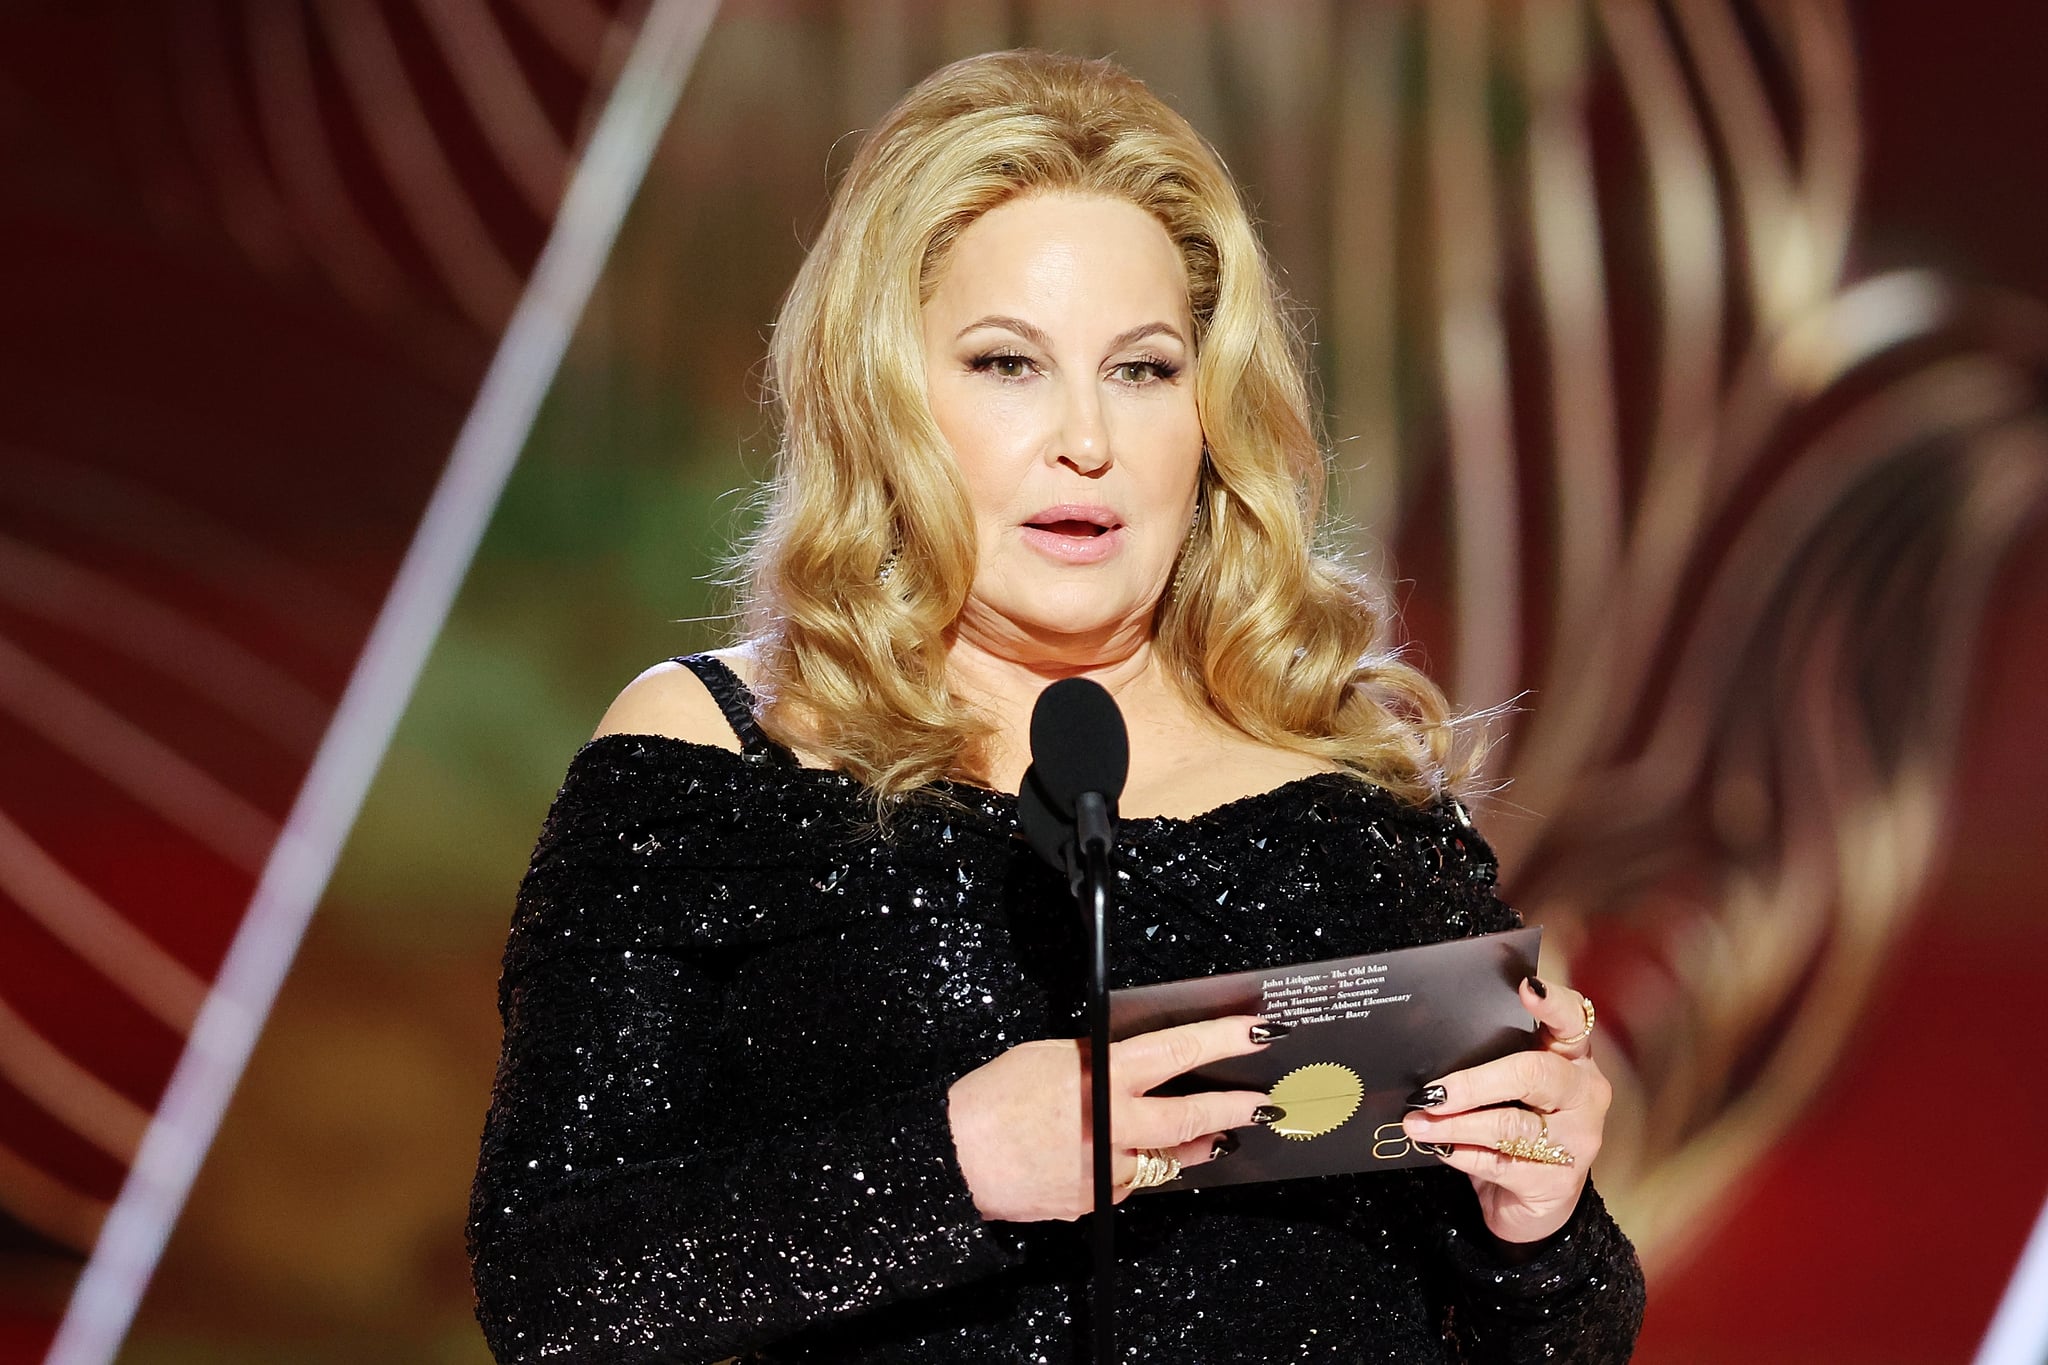 BEVERLY HILLS, CALIFORNIA - JANUARY 10: 80th Annual GOLDEN GLOBE AWARDS -- Pictured: Jennifer Coolidge speaks onstage at the 80th Annual Golden Globe Awards held at the Beverly Hilton Hotel on January 10, 2023 in Beverly Hills, California. -- (Photo by Rich Polk/NBC via Getty Images)